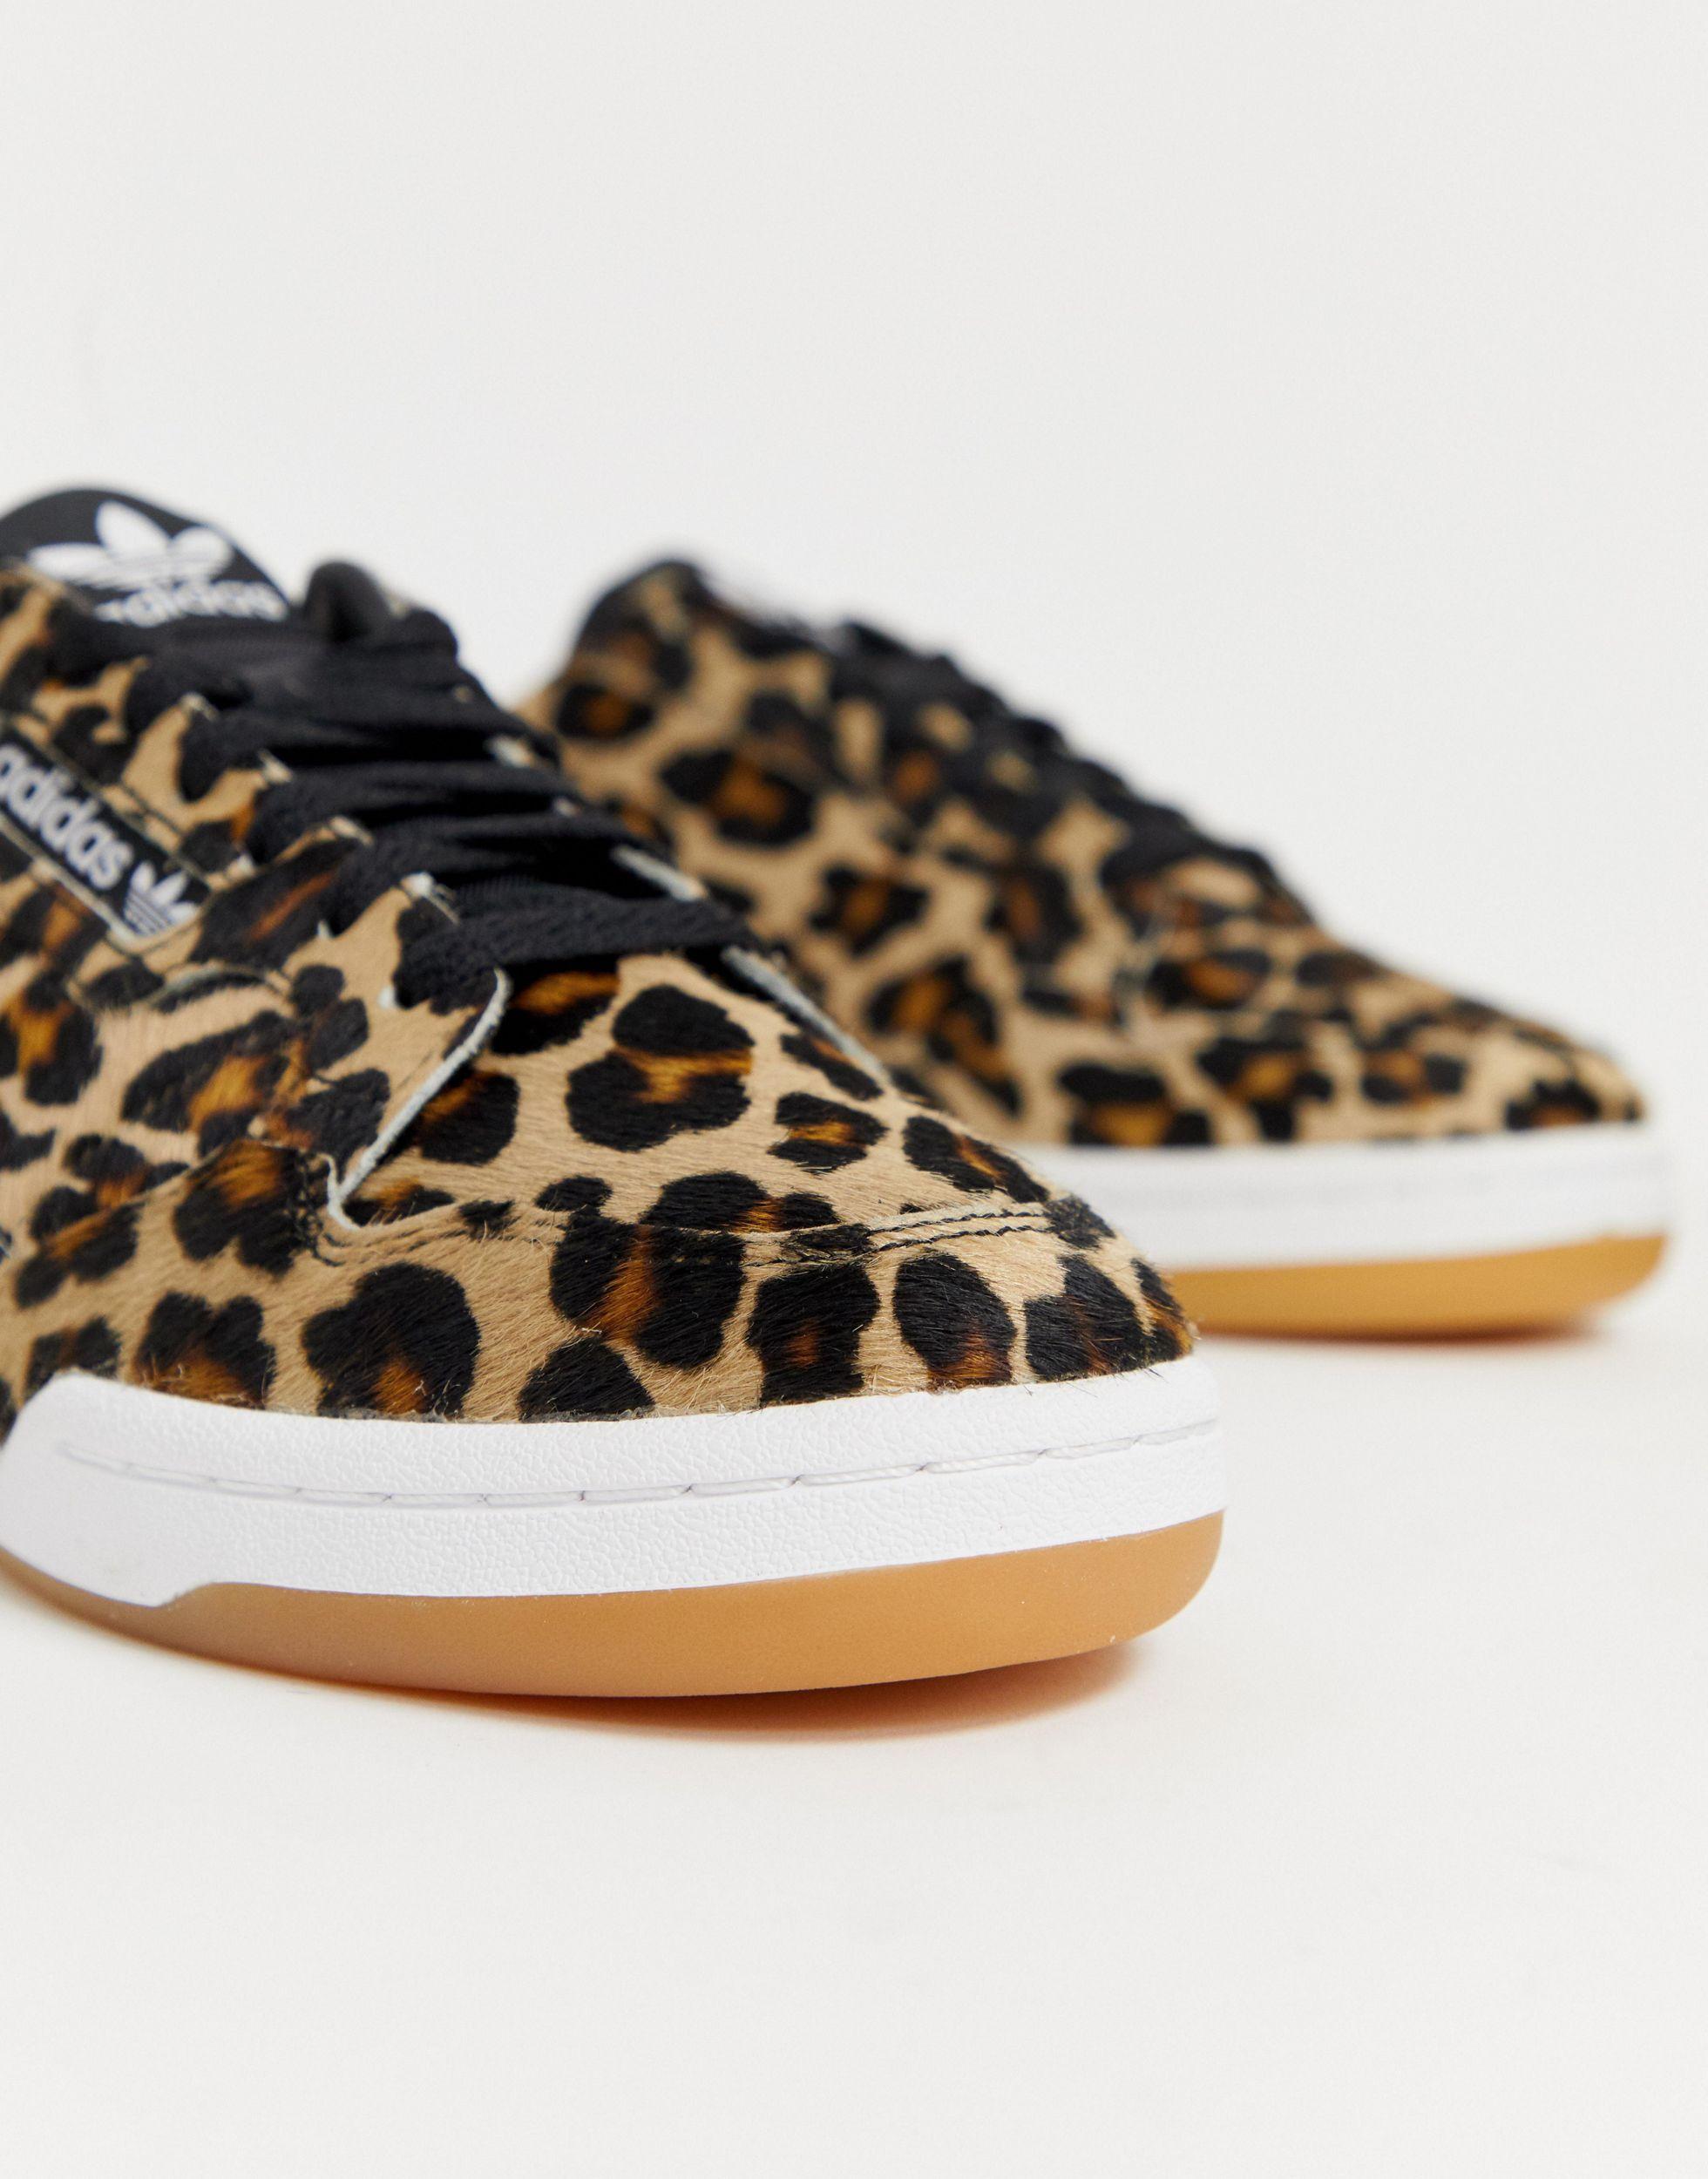 adidas Originals Leather Continental 80s Trainers Leopard Print Pony ...